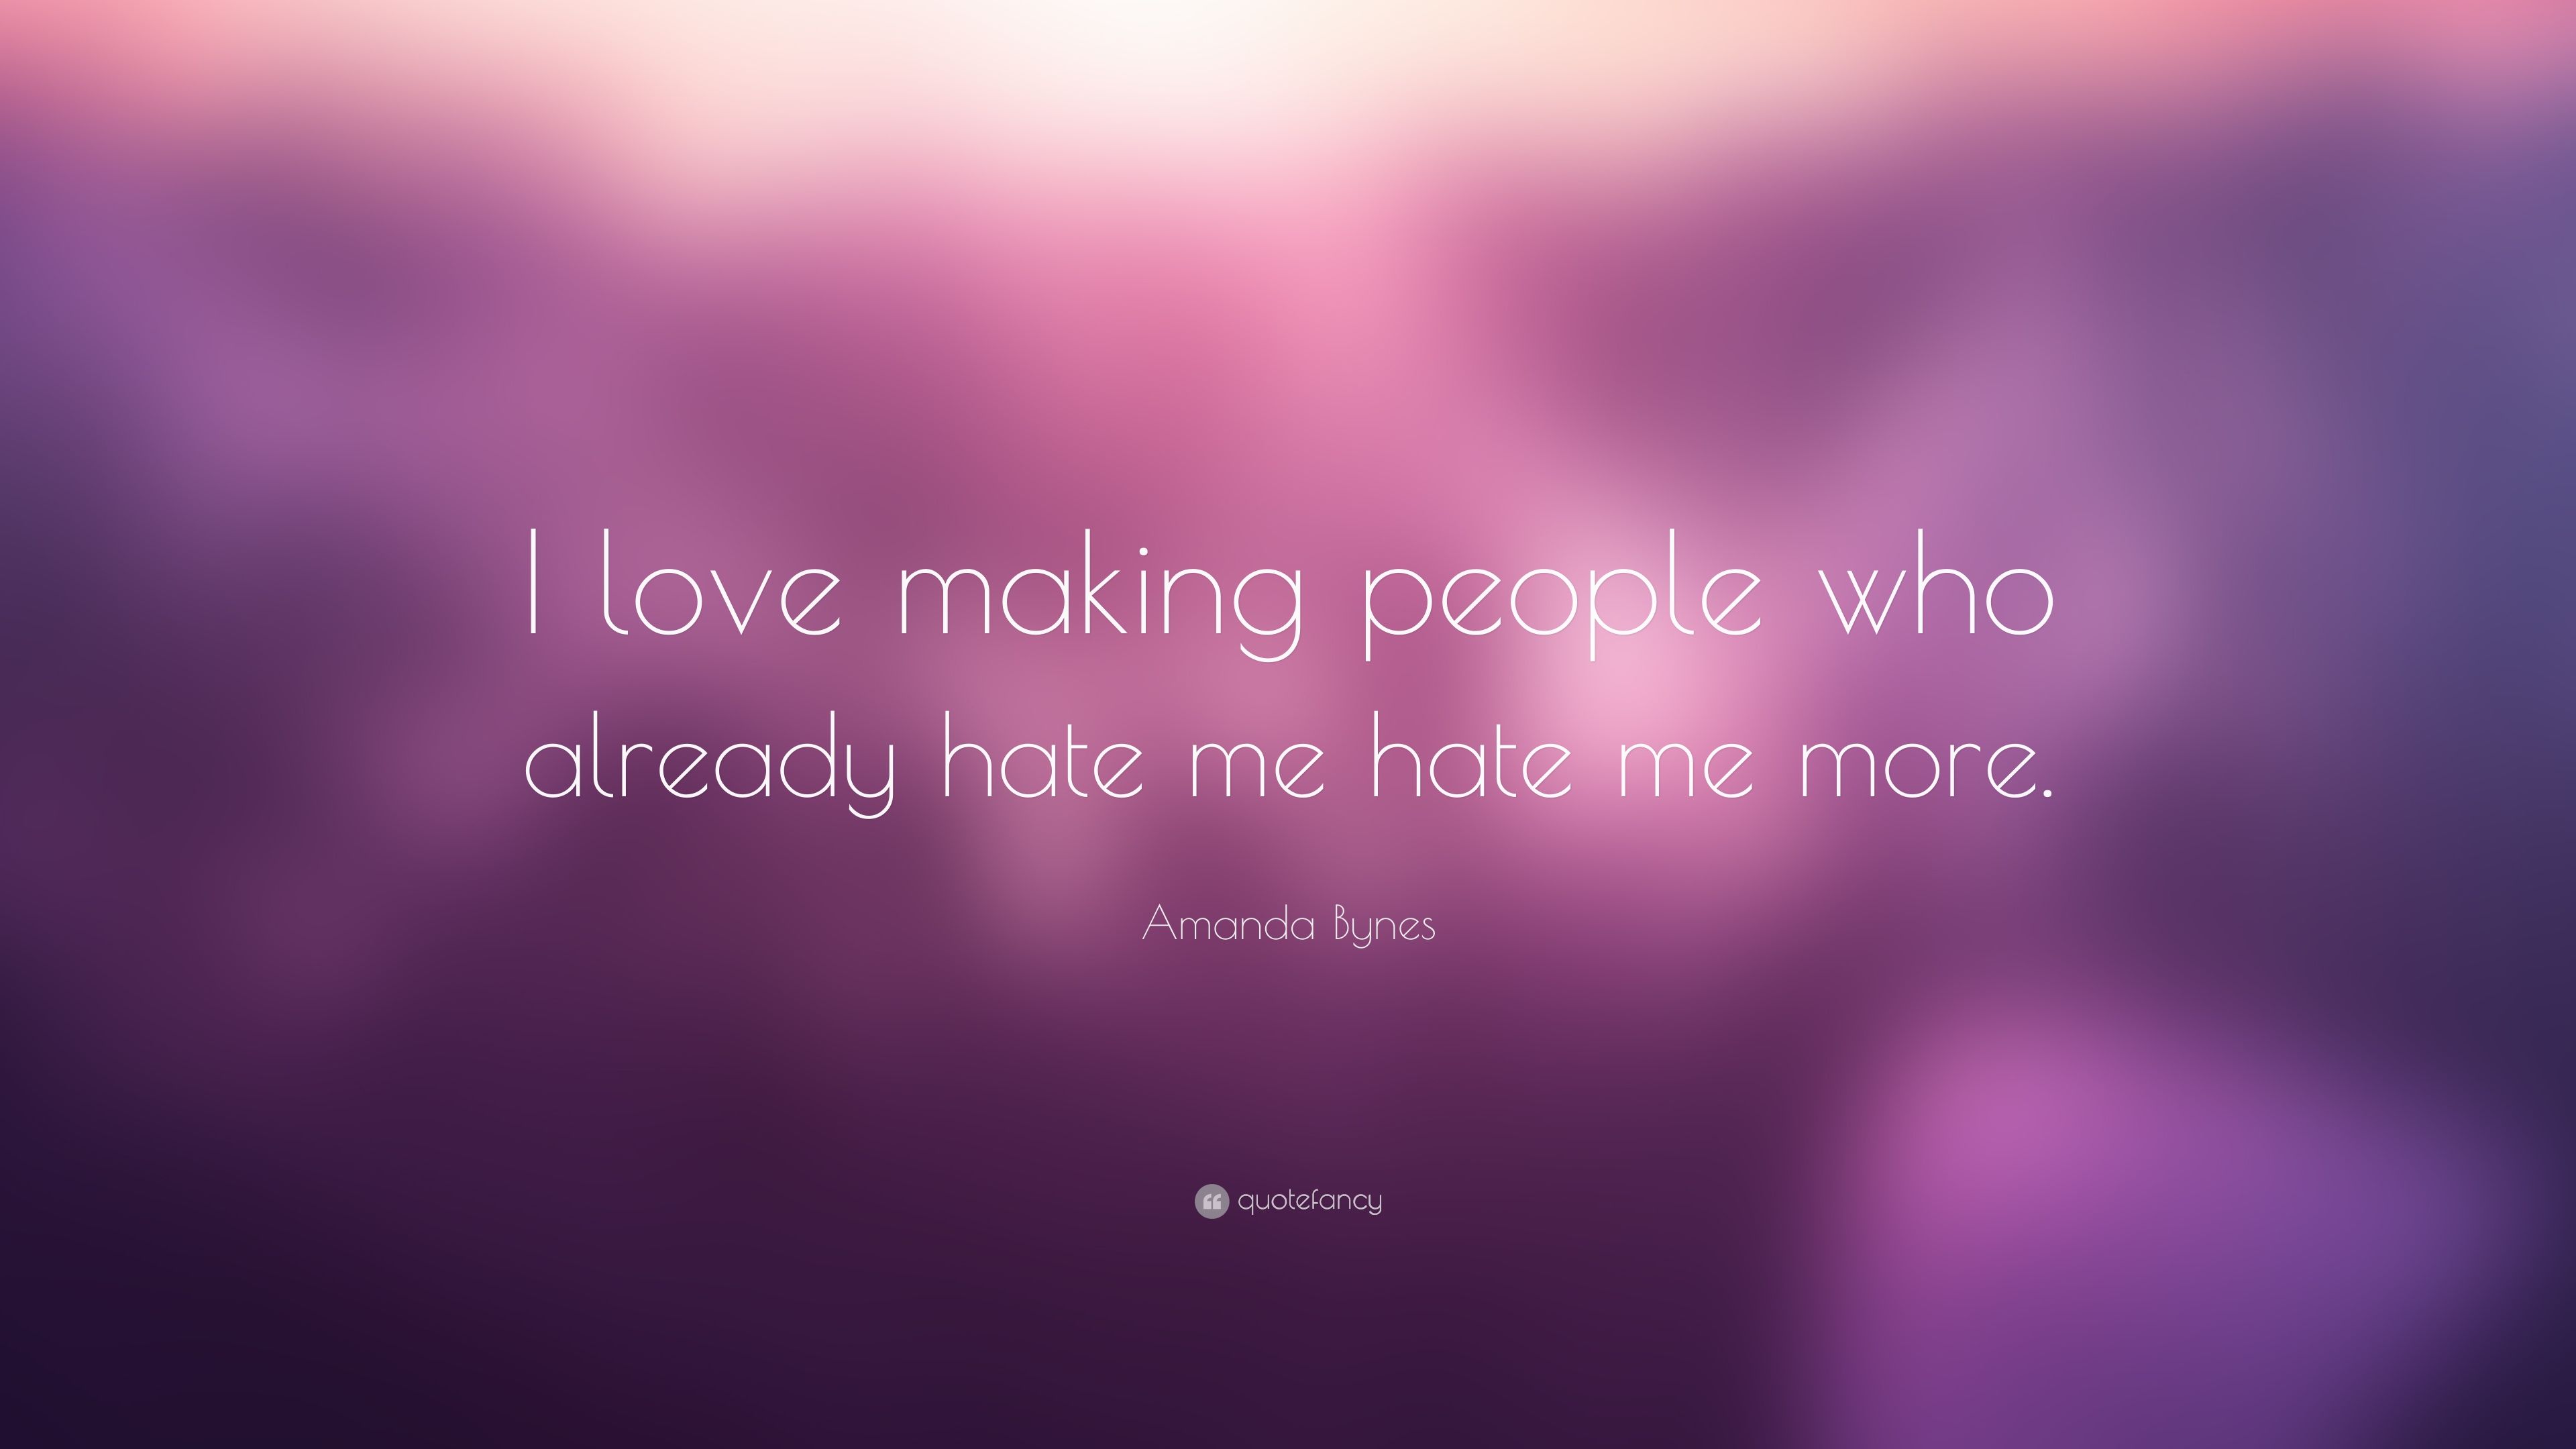 Amanda Bynes Quote: “I love making people who already hate me hate